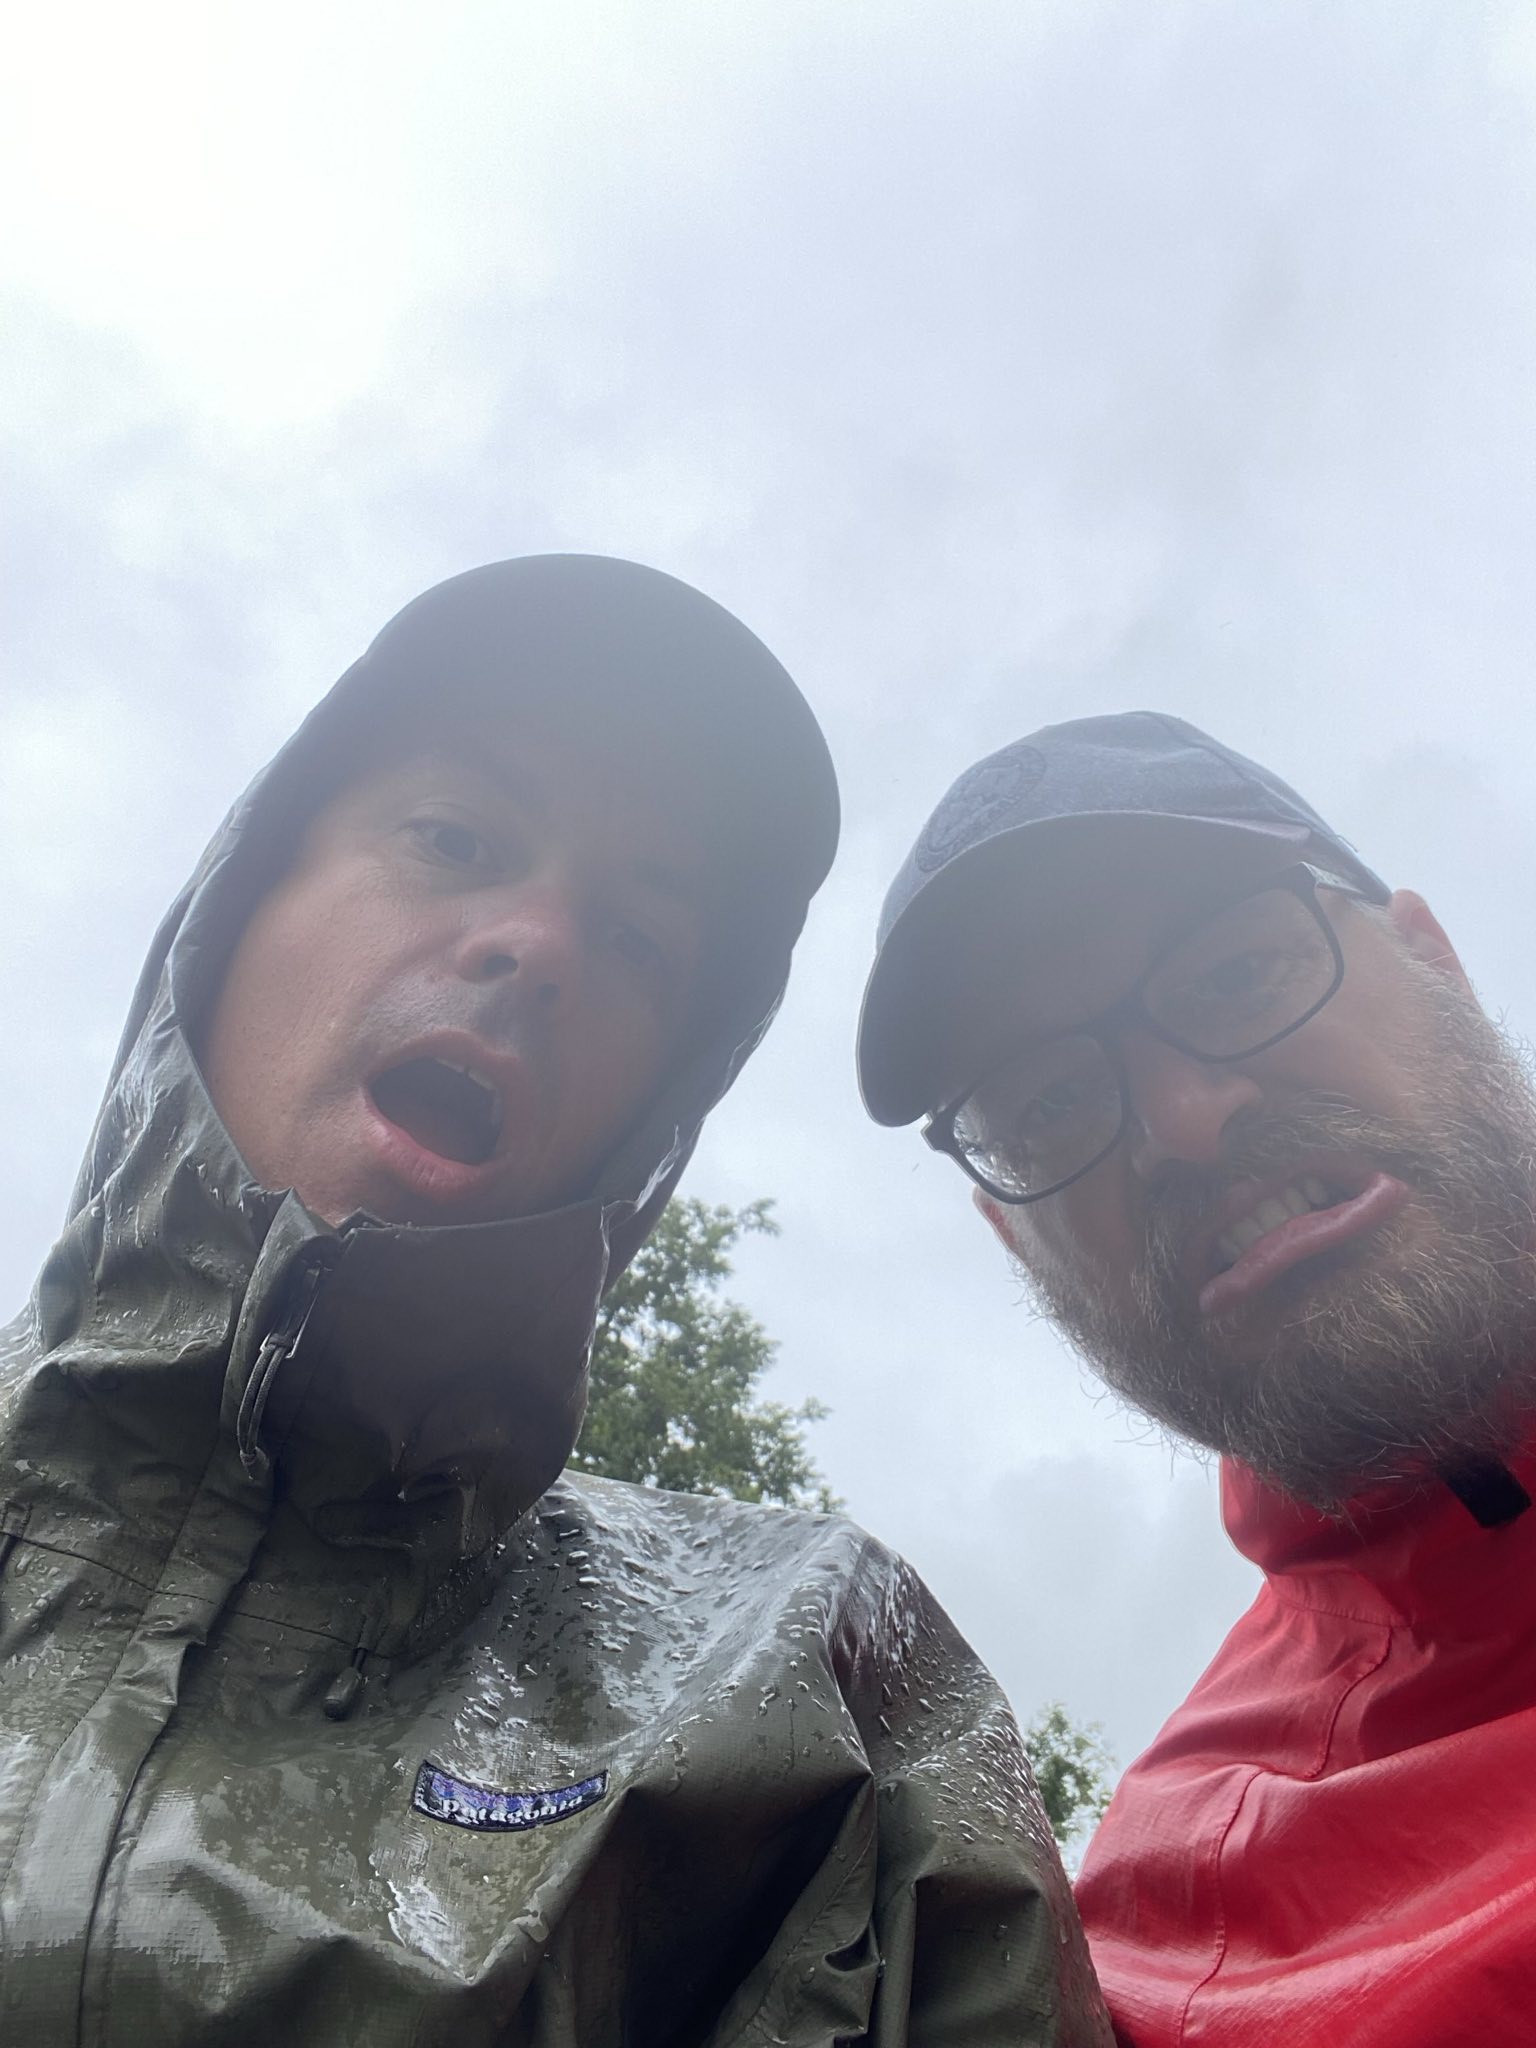 Mark and I taking a selfie in wet gear, looking very damp